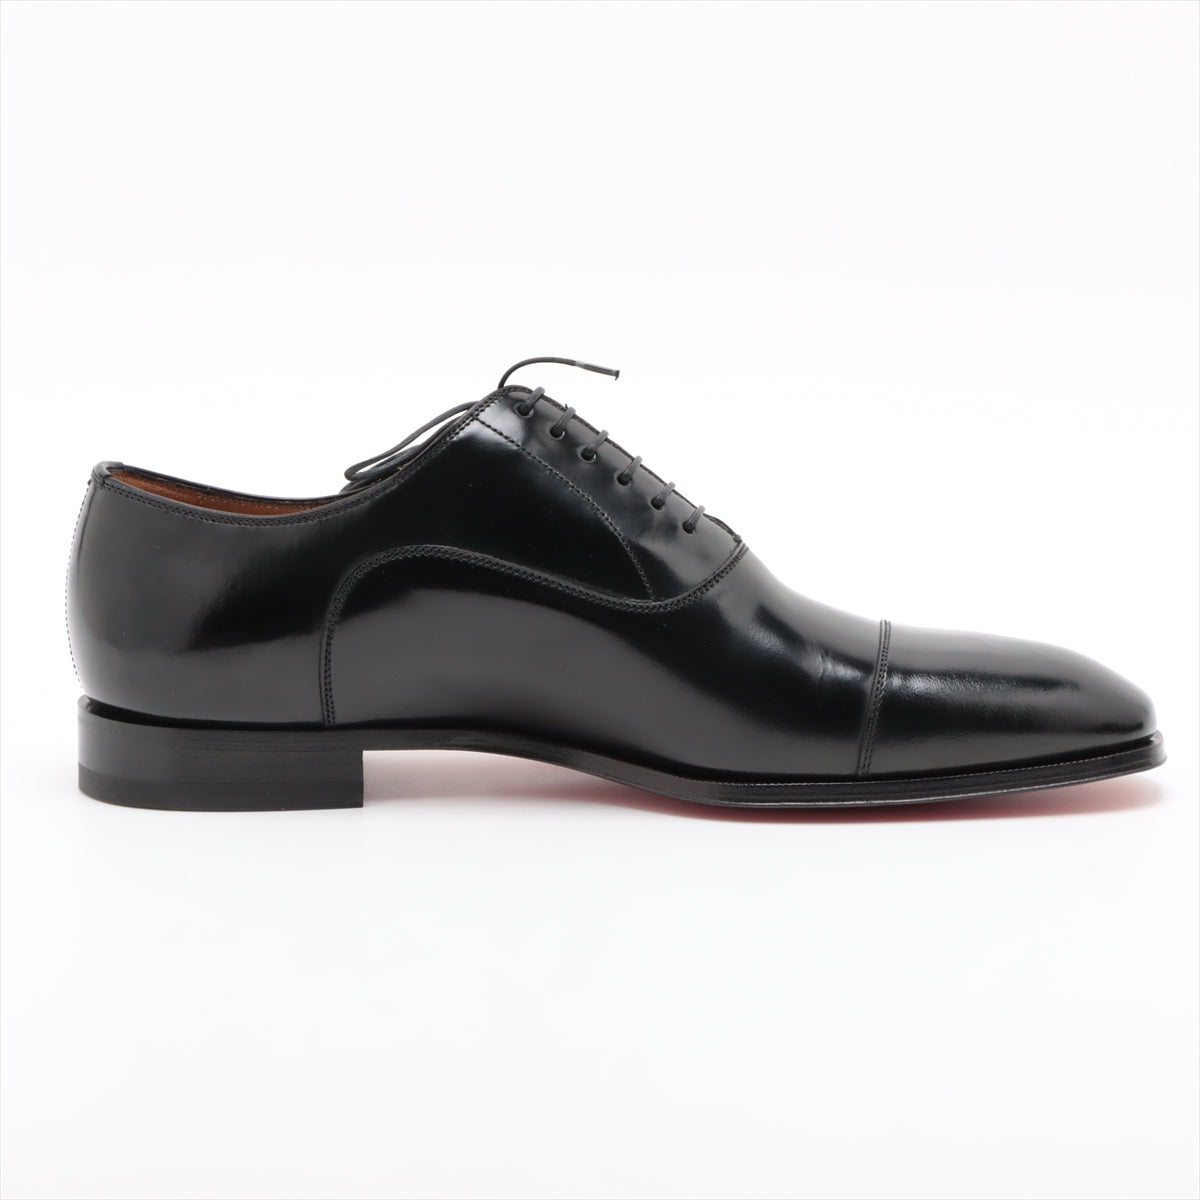 Christian Louboutin Leather Dress shoes 41 1/2 Men's Black ALPHA MALE FLAT Is there a replacement string